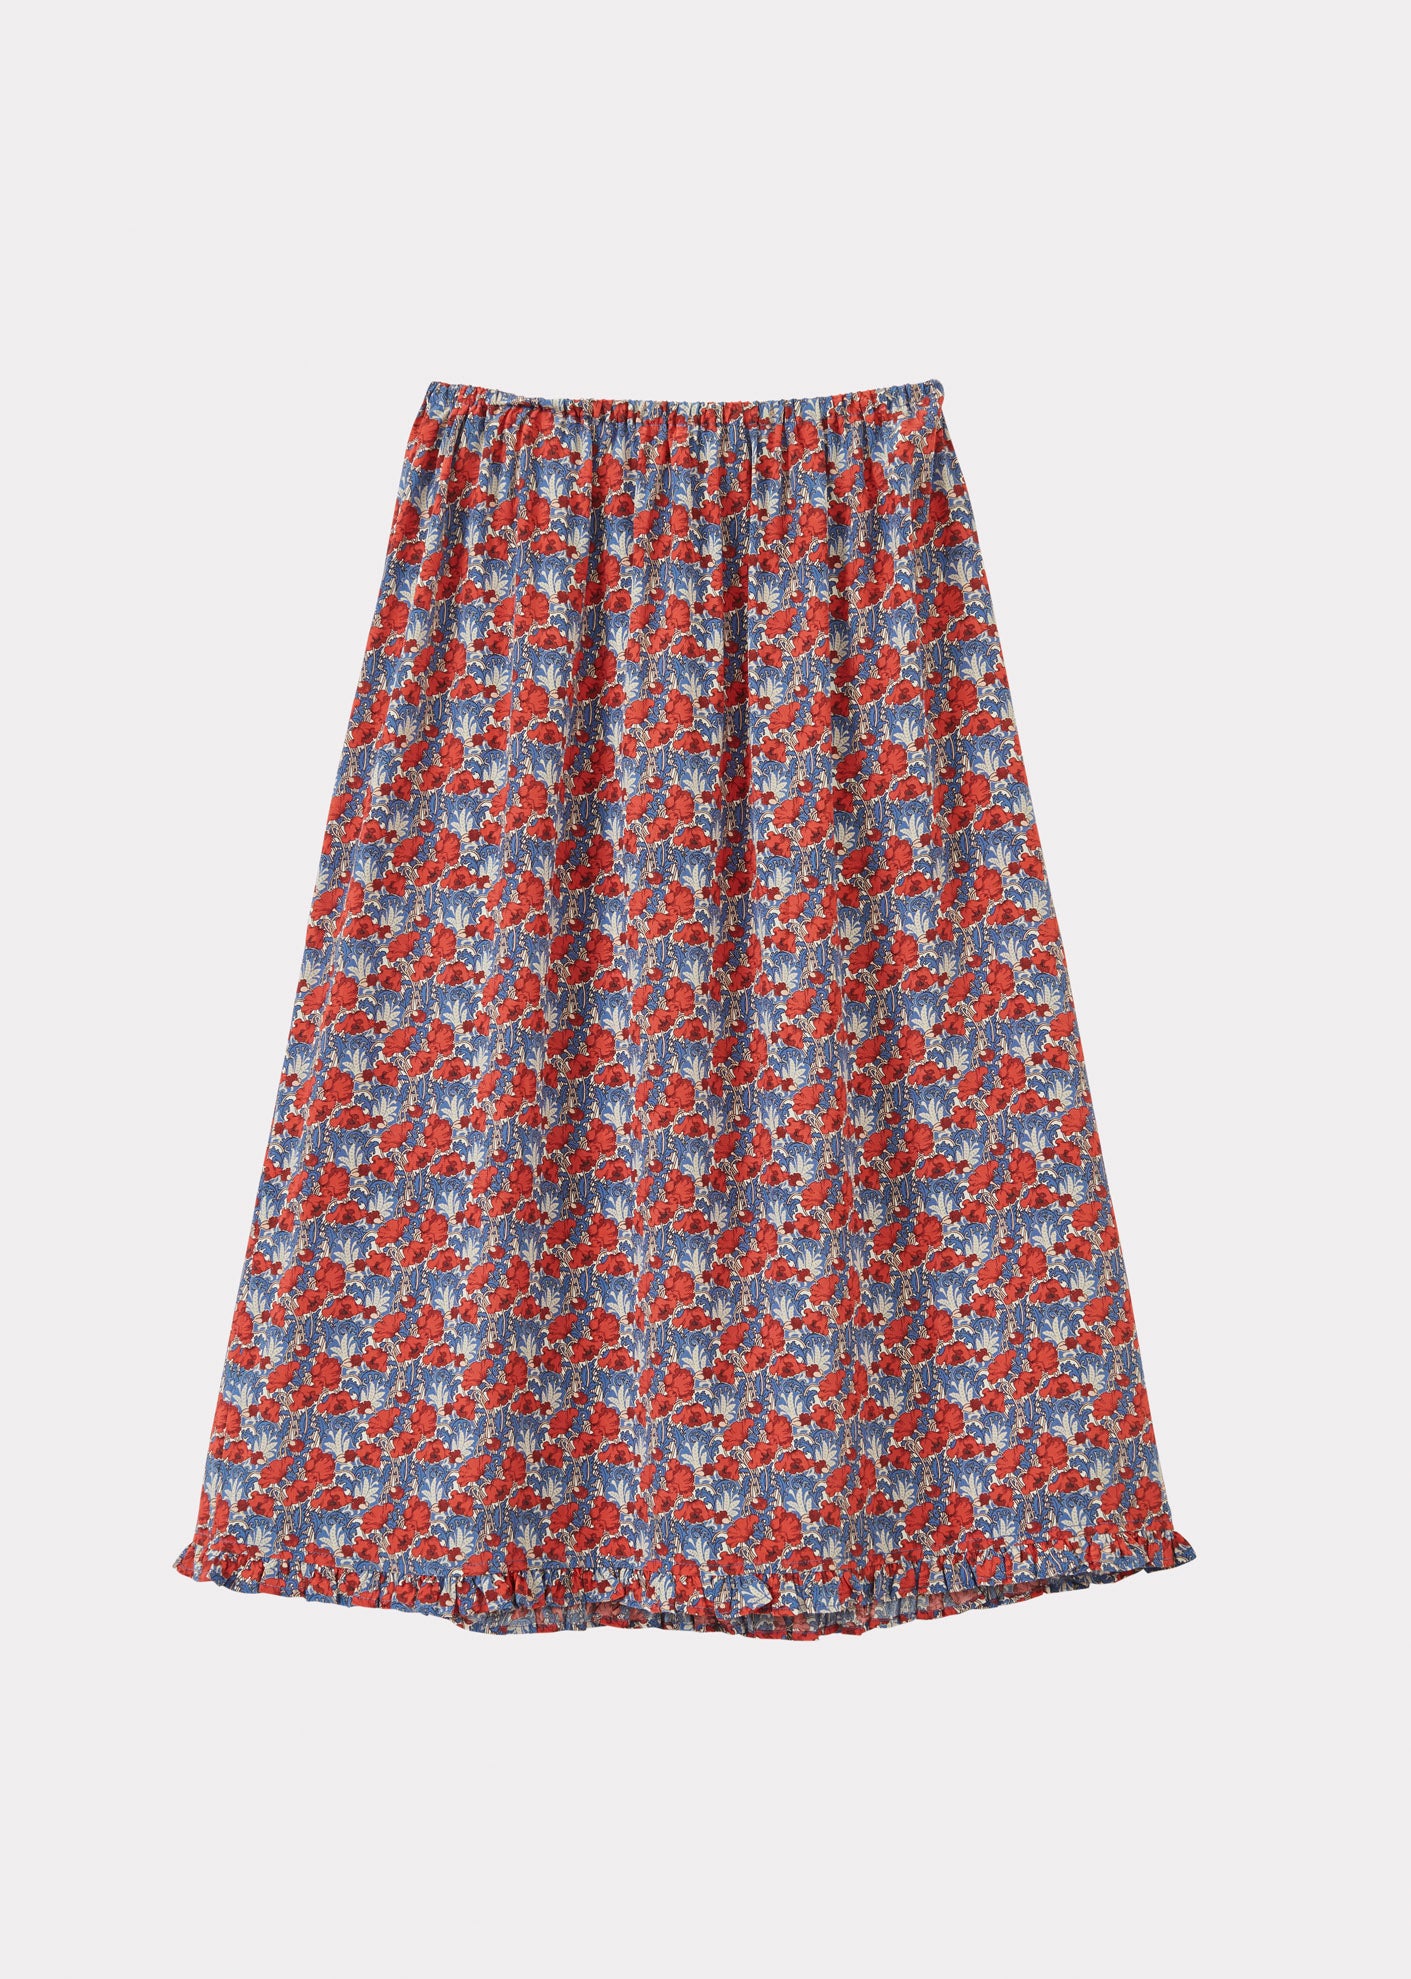 WOMAN FRILL SKIRT - CLEMENTINA RED/BLUE